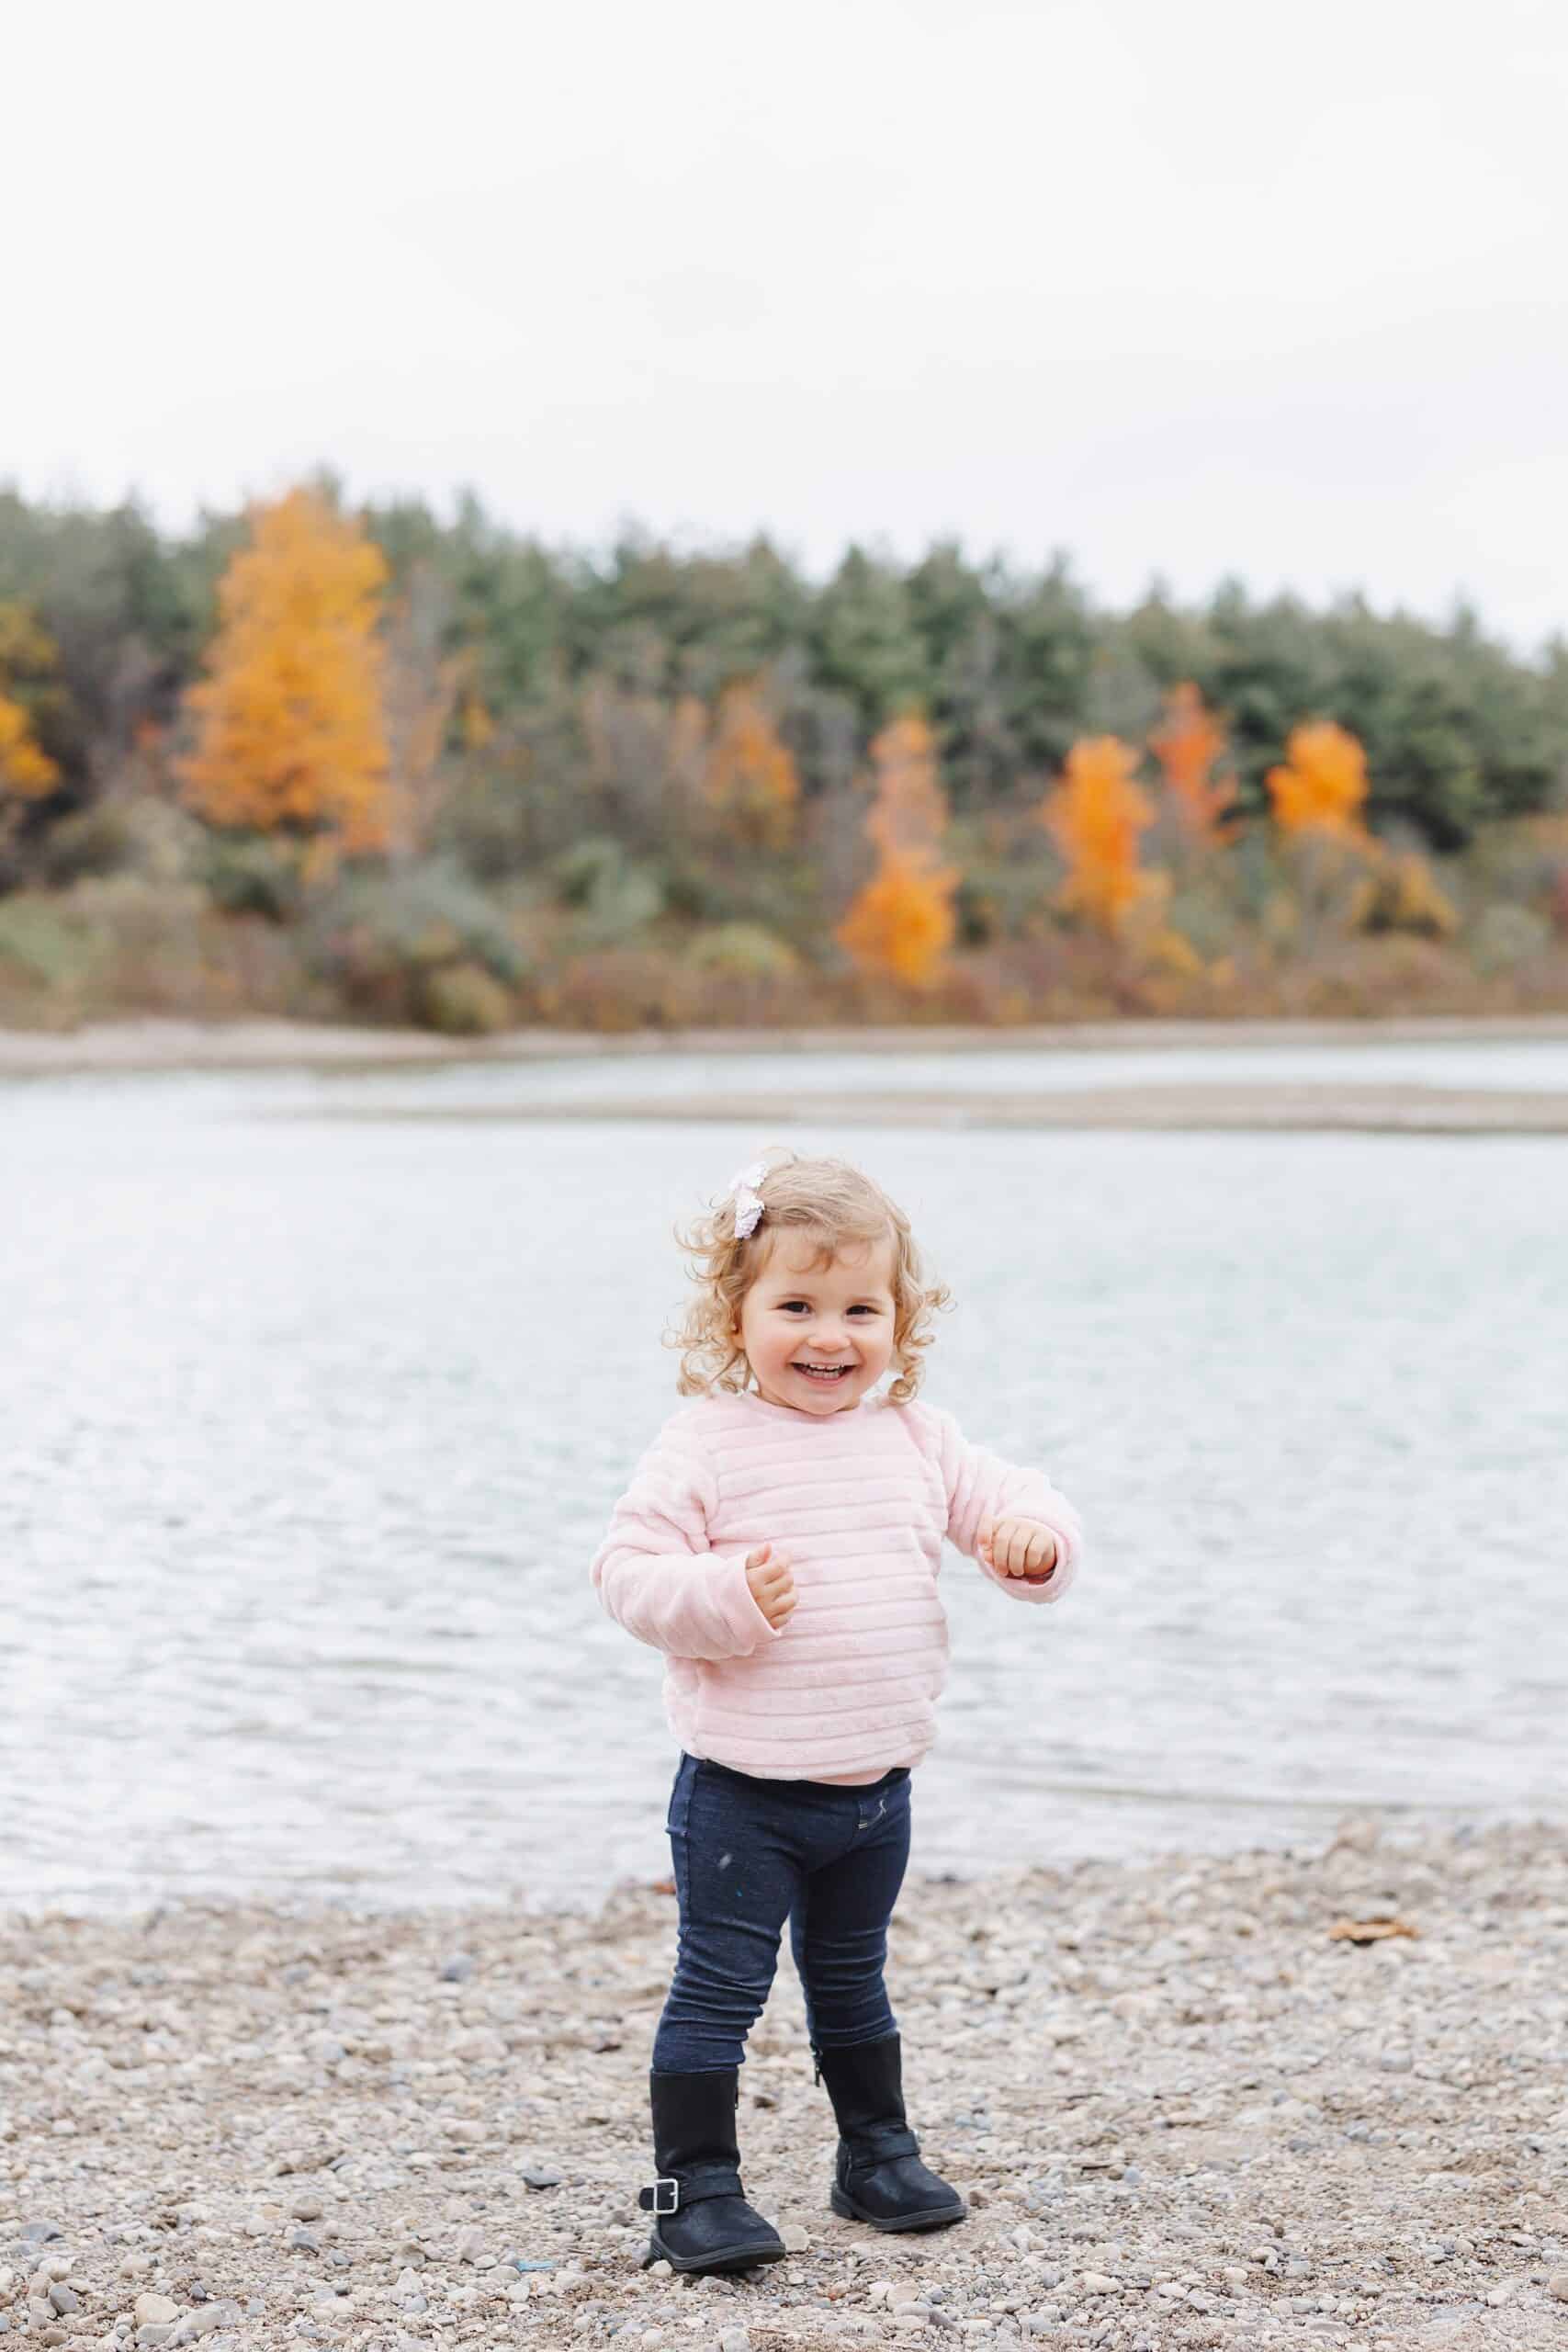 A young toddler girl in a pink sweater smiles while playing on the edge of a river before a guelph storm game